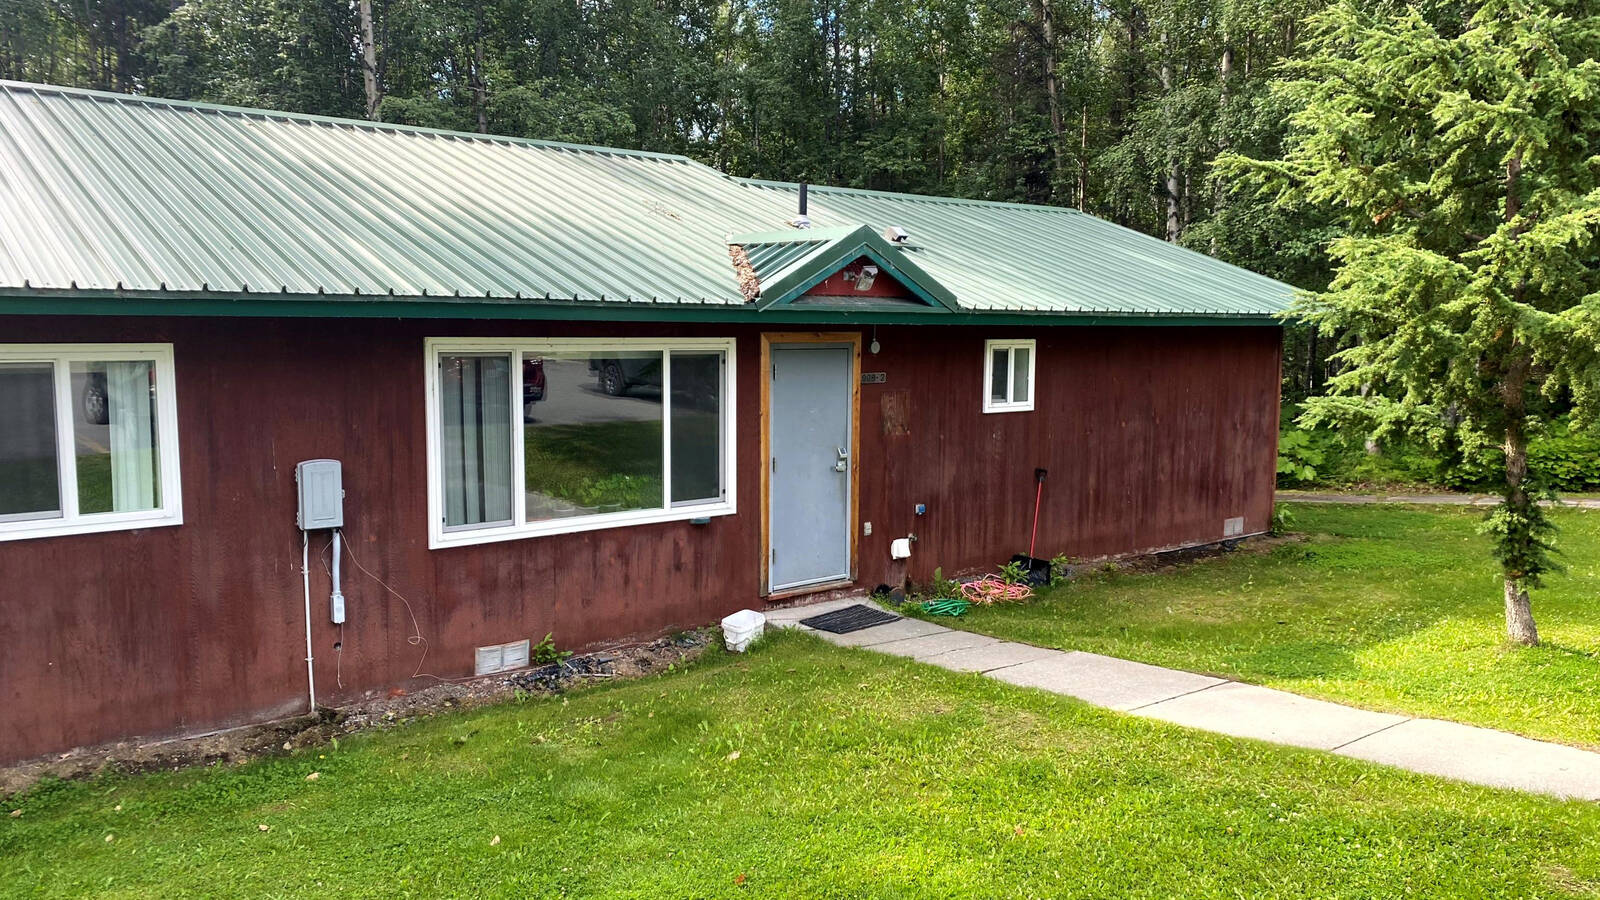 <p>Rehabilitated bunkhouse at Kenai National Wildlife Refuge in Alaska. Kenai provides worldclass fishing, camping and hiking opportunities for people around the world. </p>